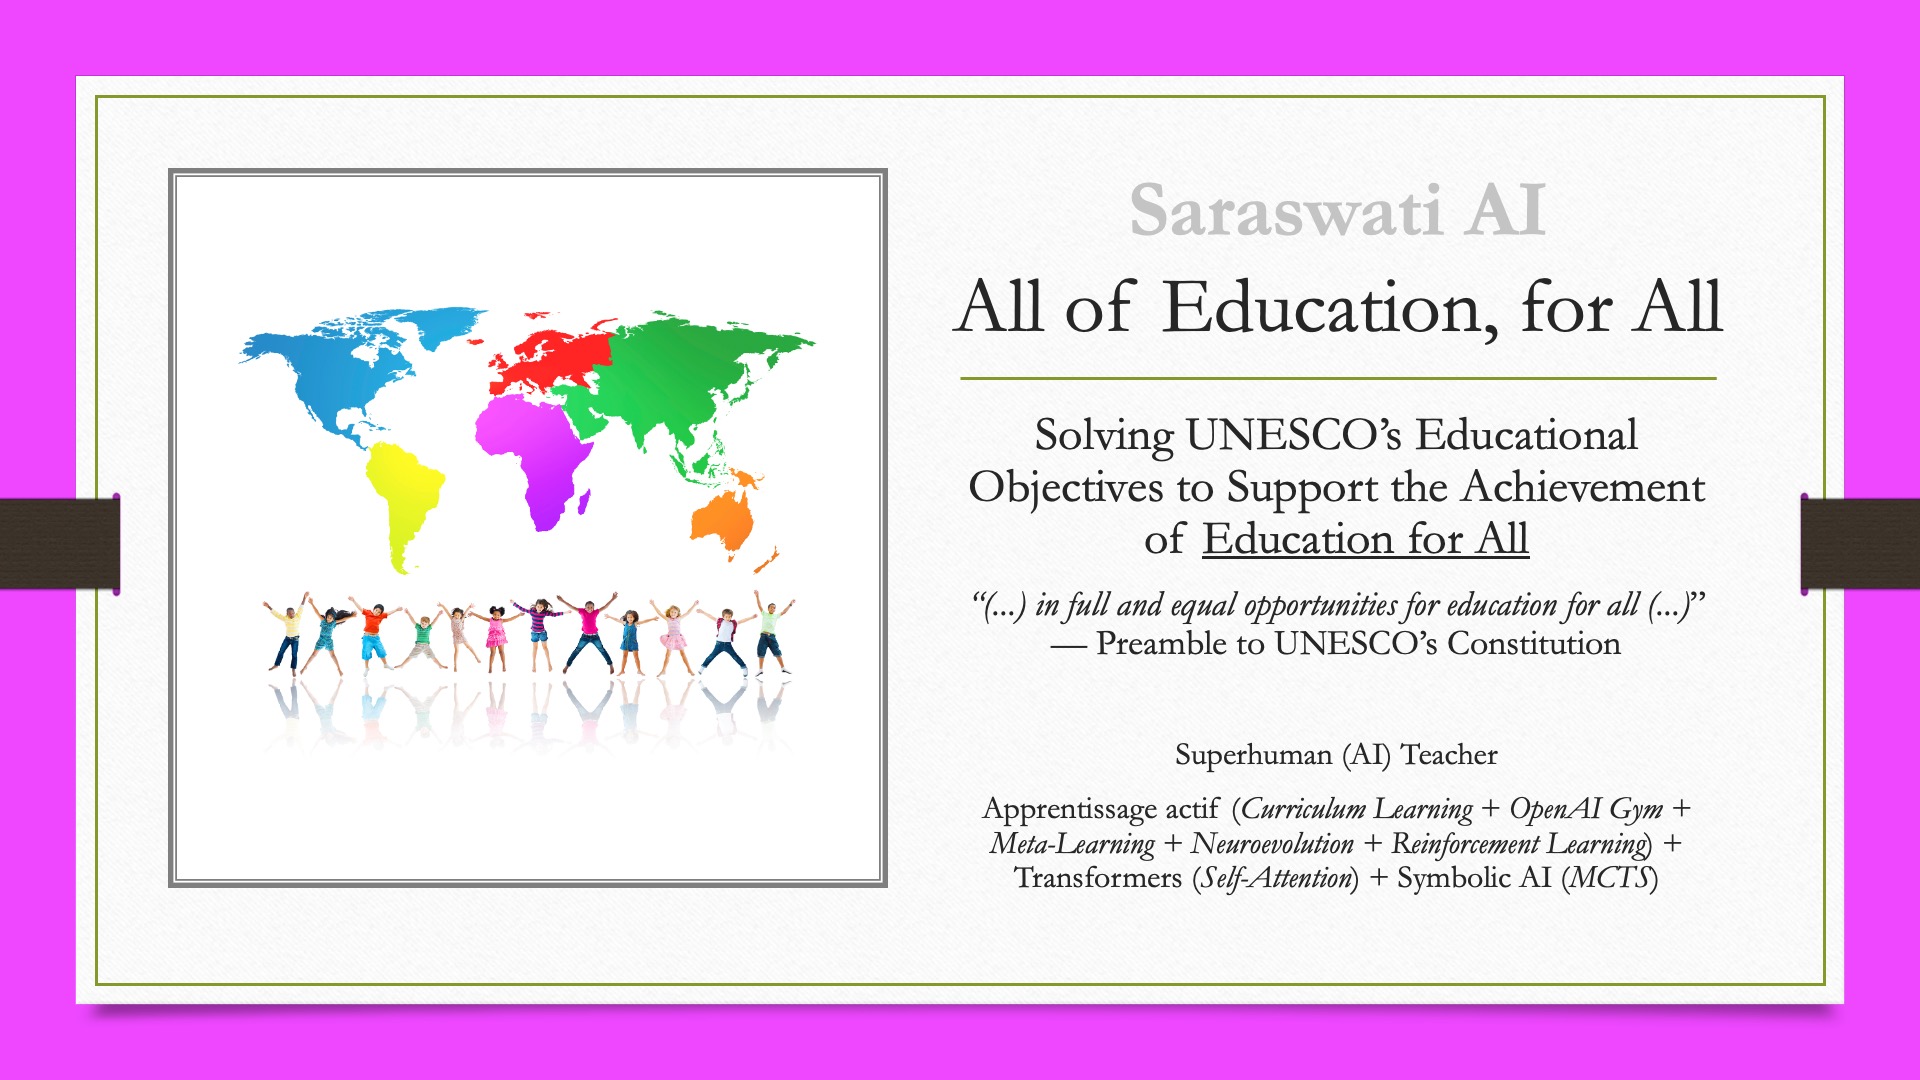 Saraswati AI: All of Education, for All | Solving UNESCO’s Educational Objectives to Support the Achievement of Education for All